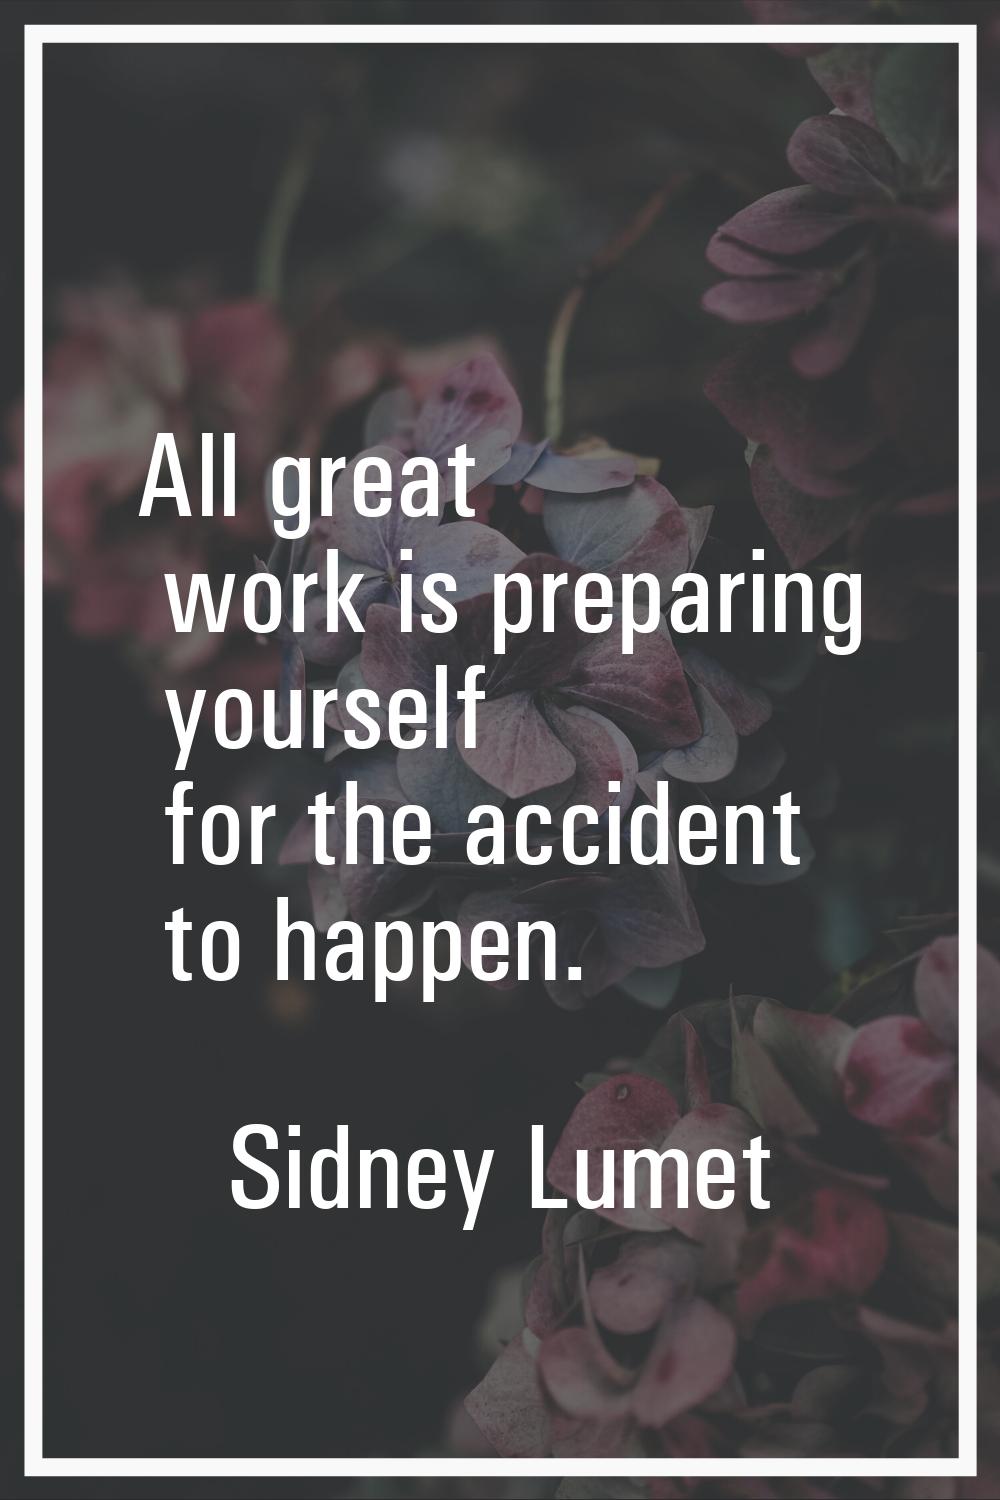 All great work is preparing yourself for the accident to happen.